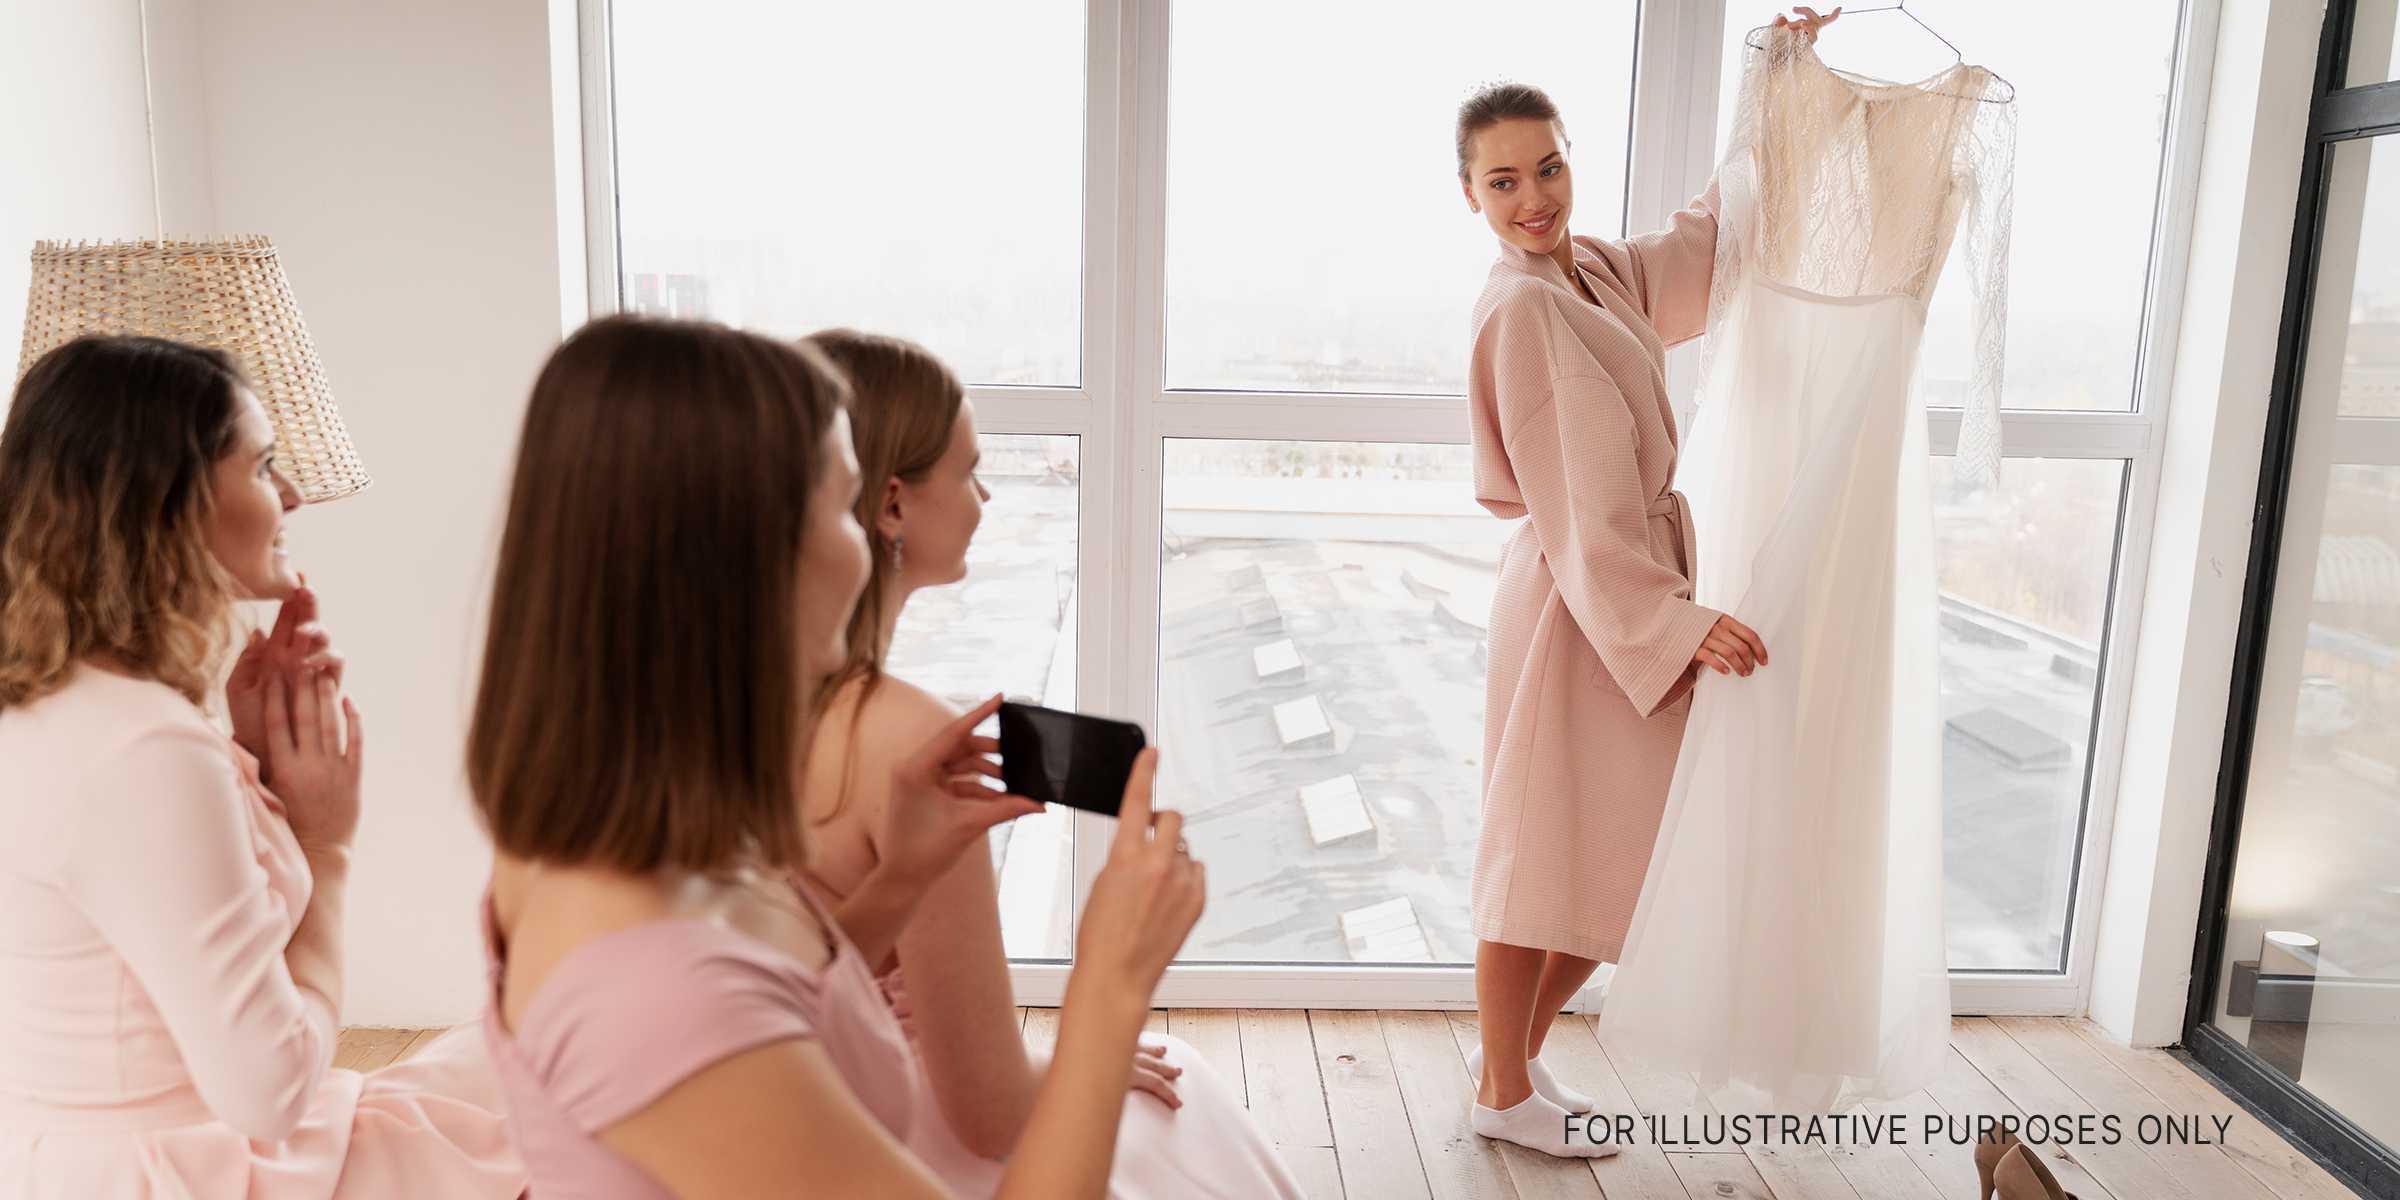 A bunch of women looking at another one holding up a wedding dress | Source: Freepik.com